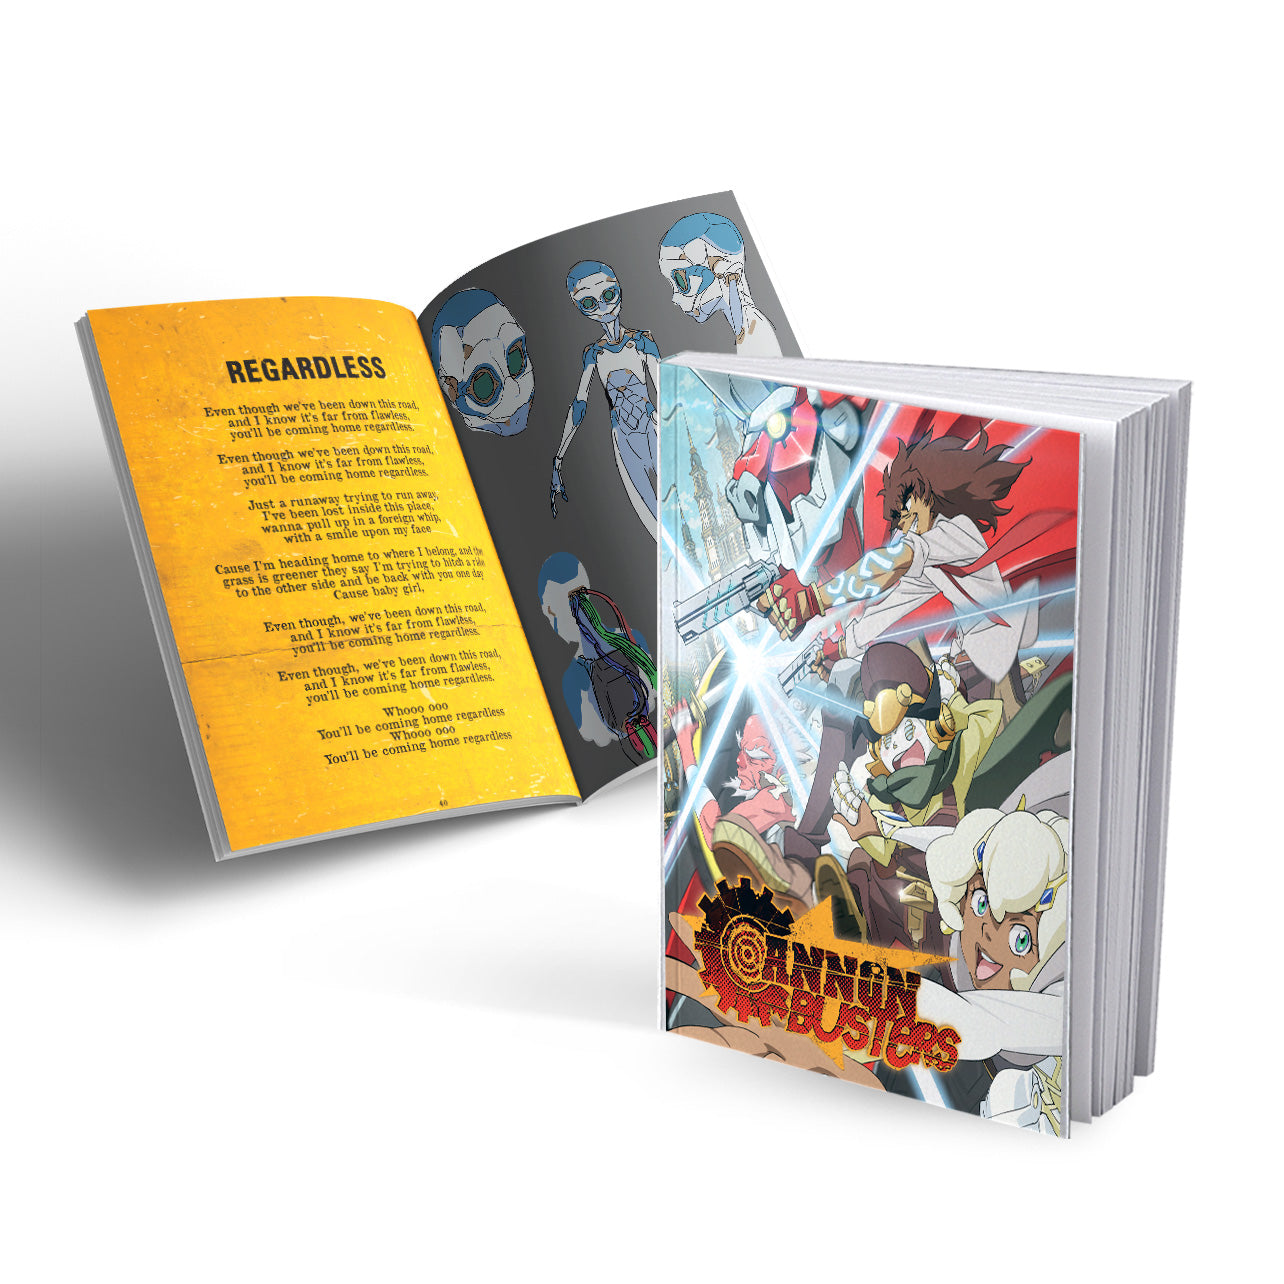 Cannon Busters - The Complete Series - Limited Edition - Blu-ray + DVD image count 1